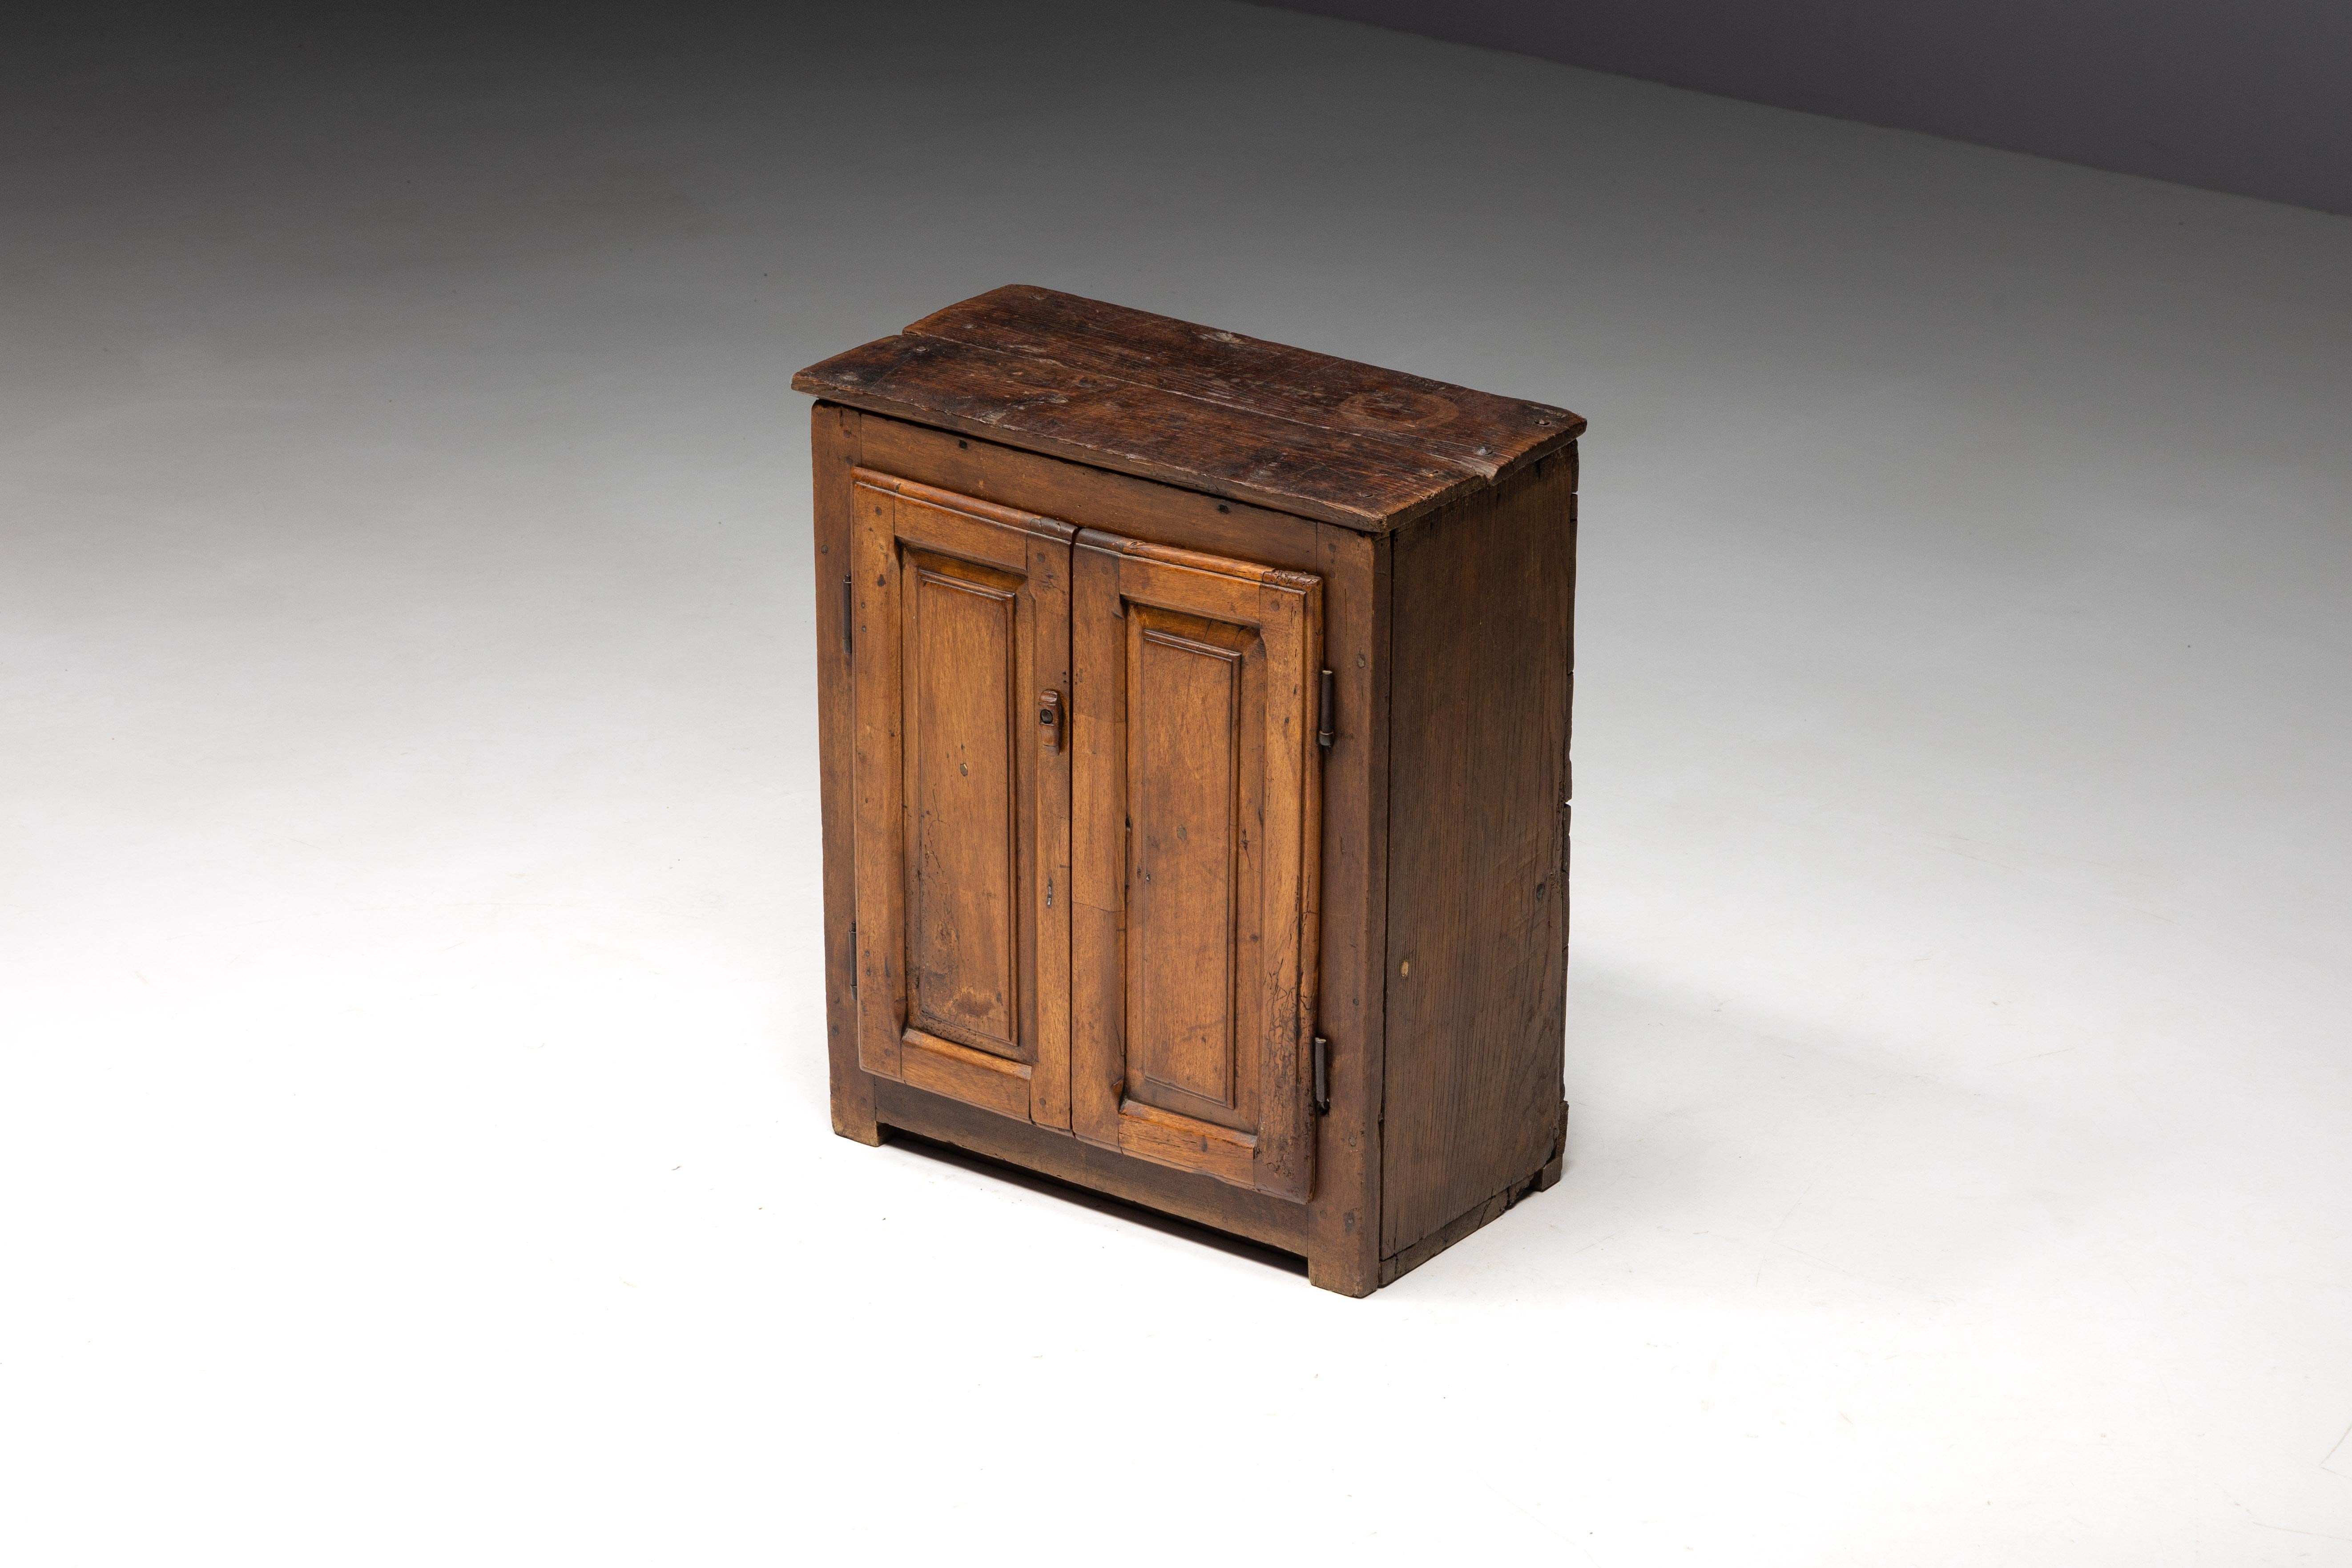 19th-century rustic cupboard handcrafted of solid wood. This piece, formerly used as a 